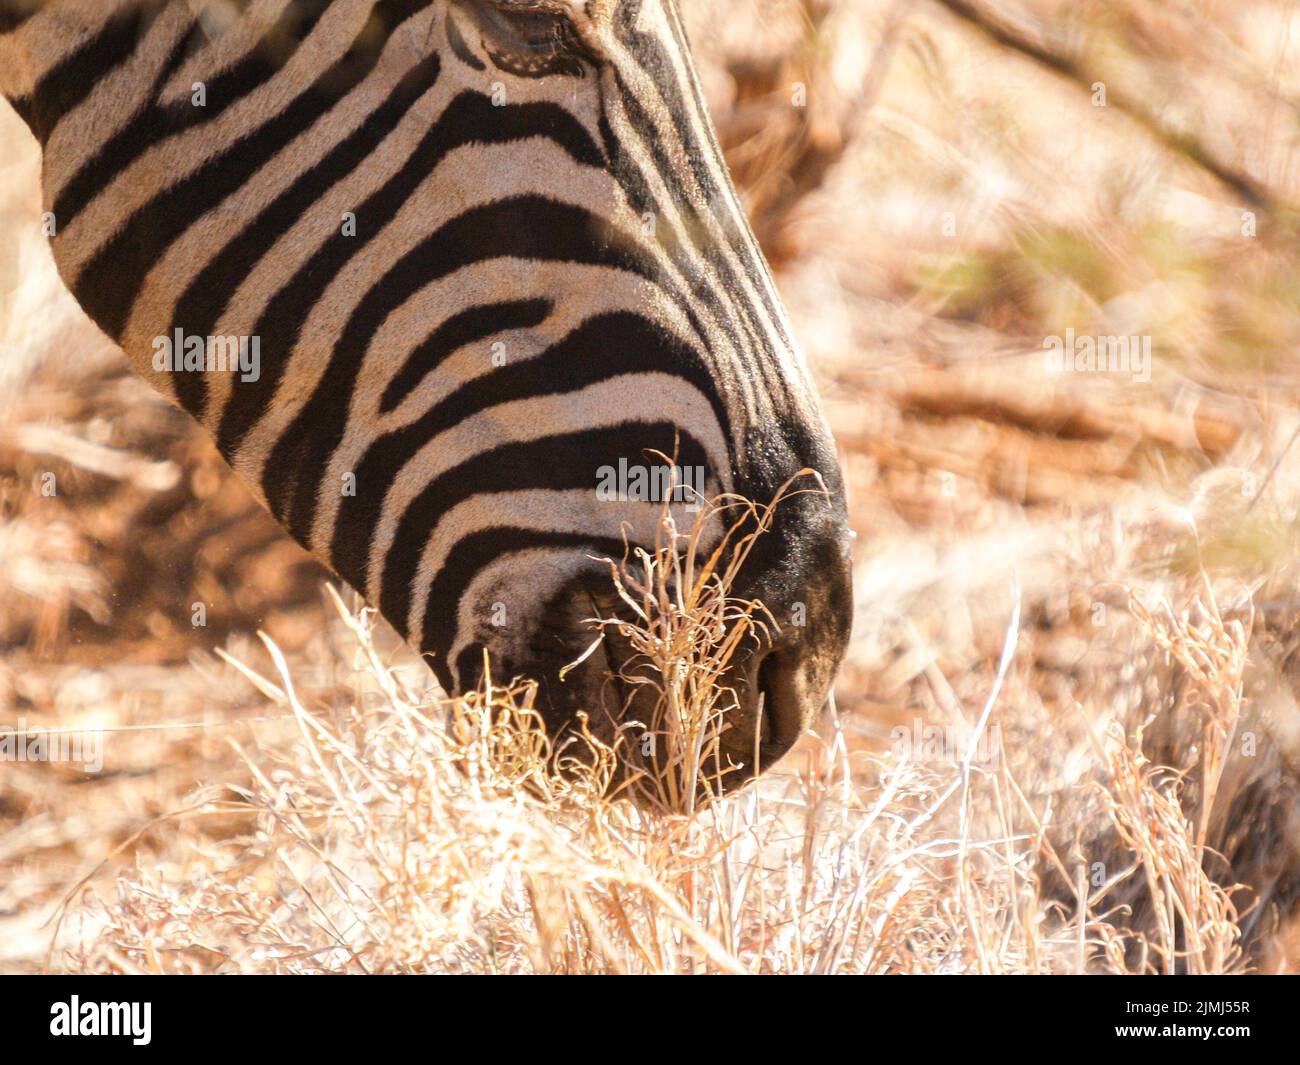 Animal patterns, zebra head grazing, close-up in South Africa Stock Photo